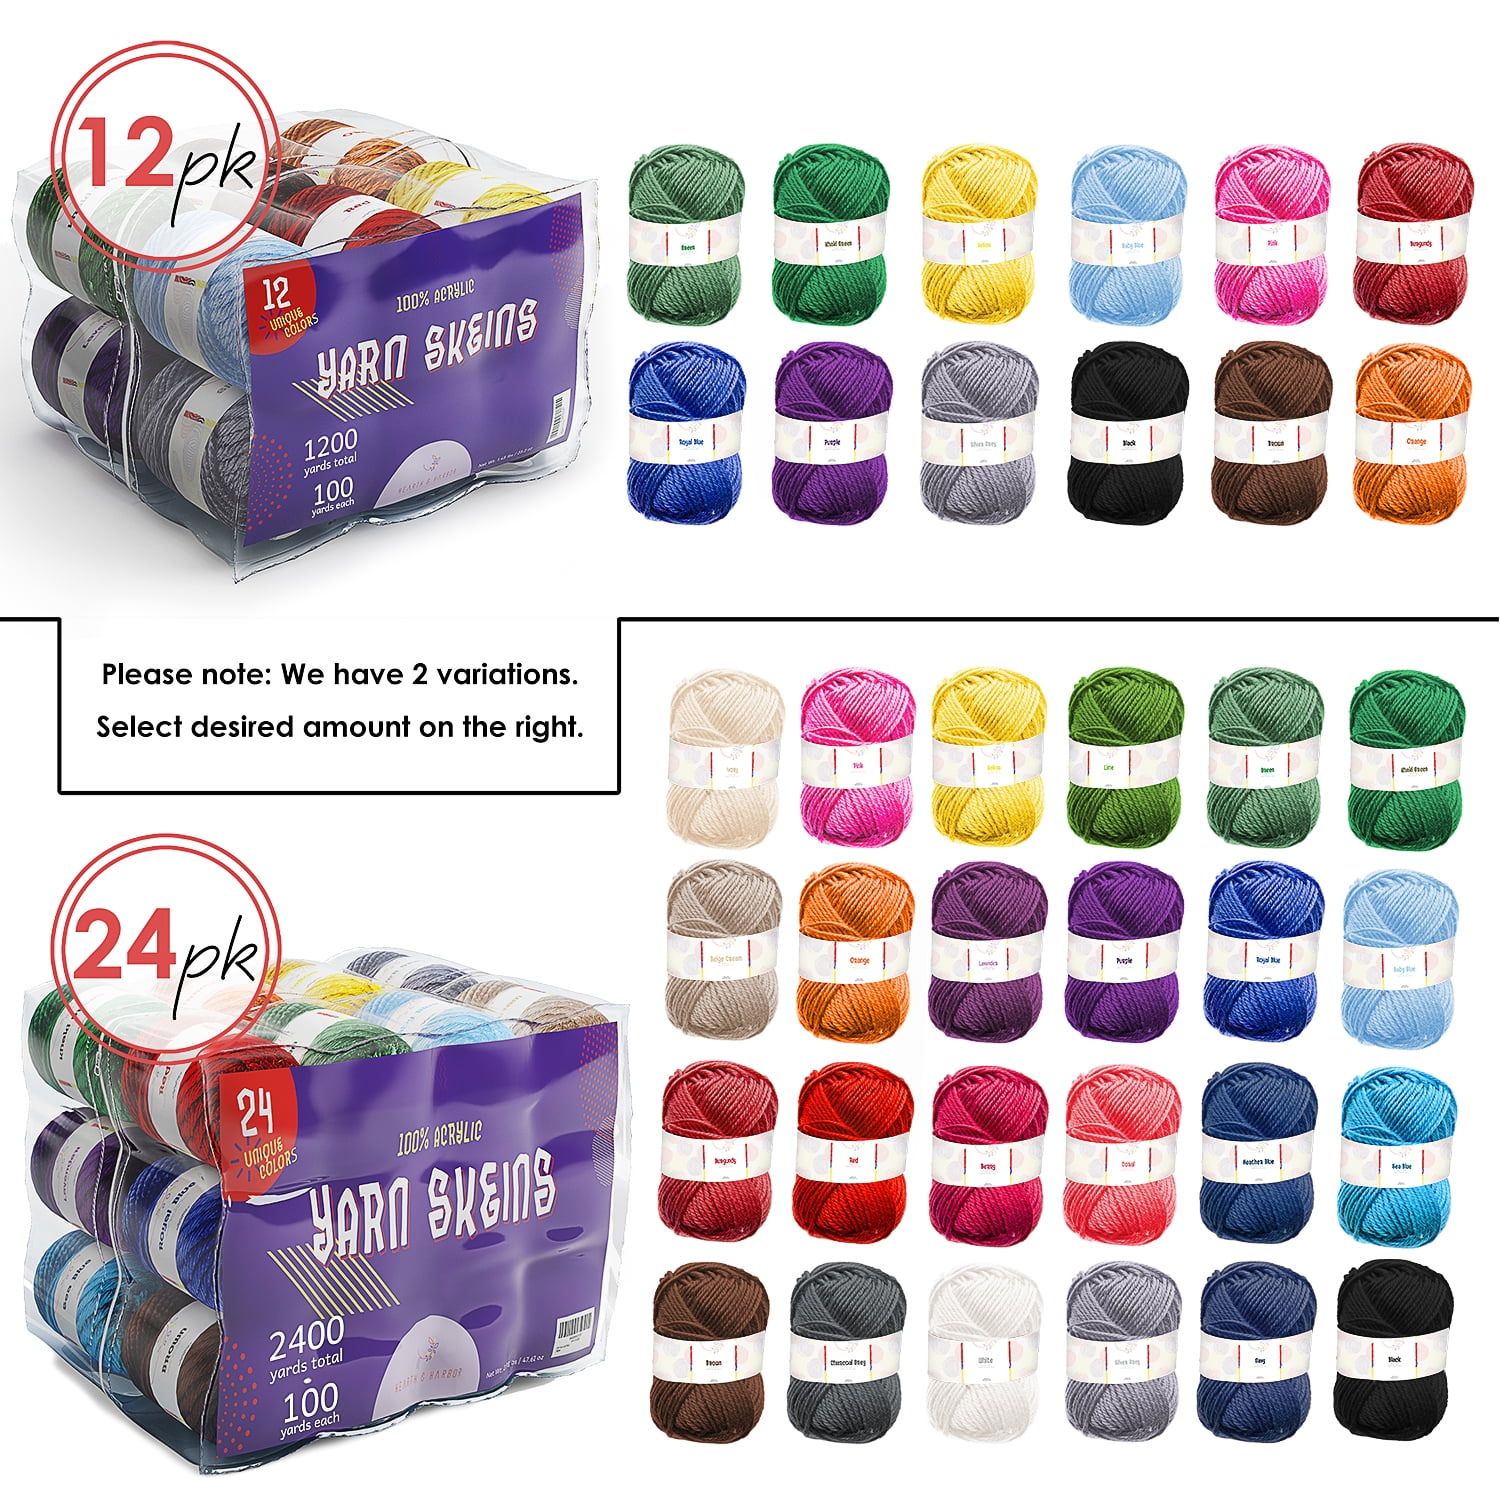 Acrylic Yarn | 1312 Yards | Large 50g Skeins | 12 Multicolor Knitting and  Crochet Yarn Bulk – Starter Kit for Colorful Craft - 7 Ebooks with Yarn